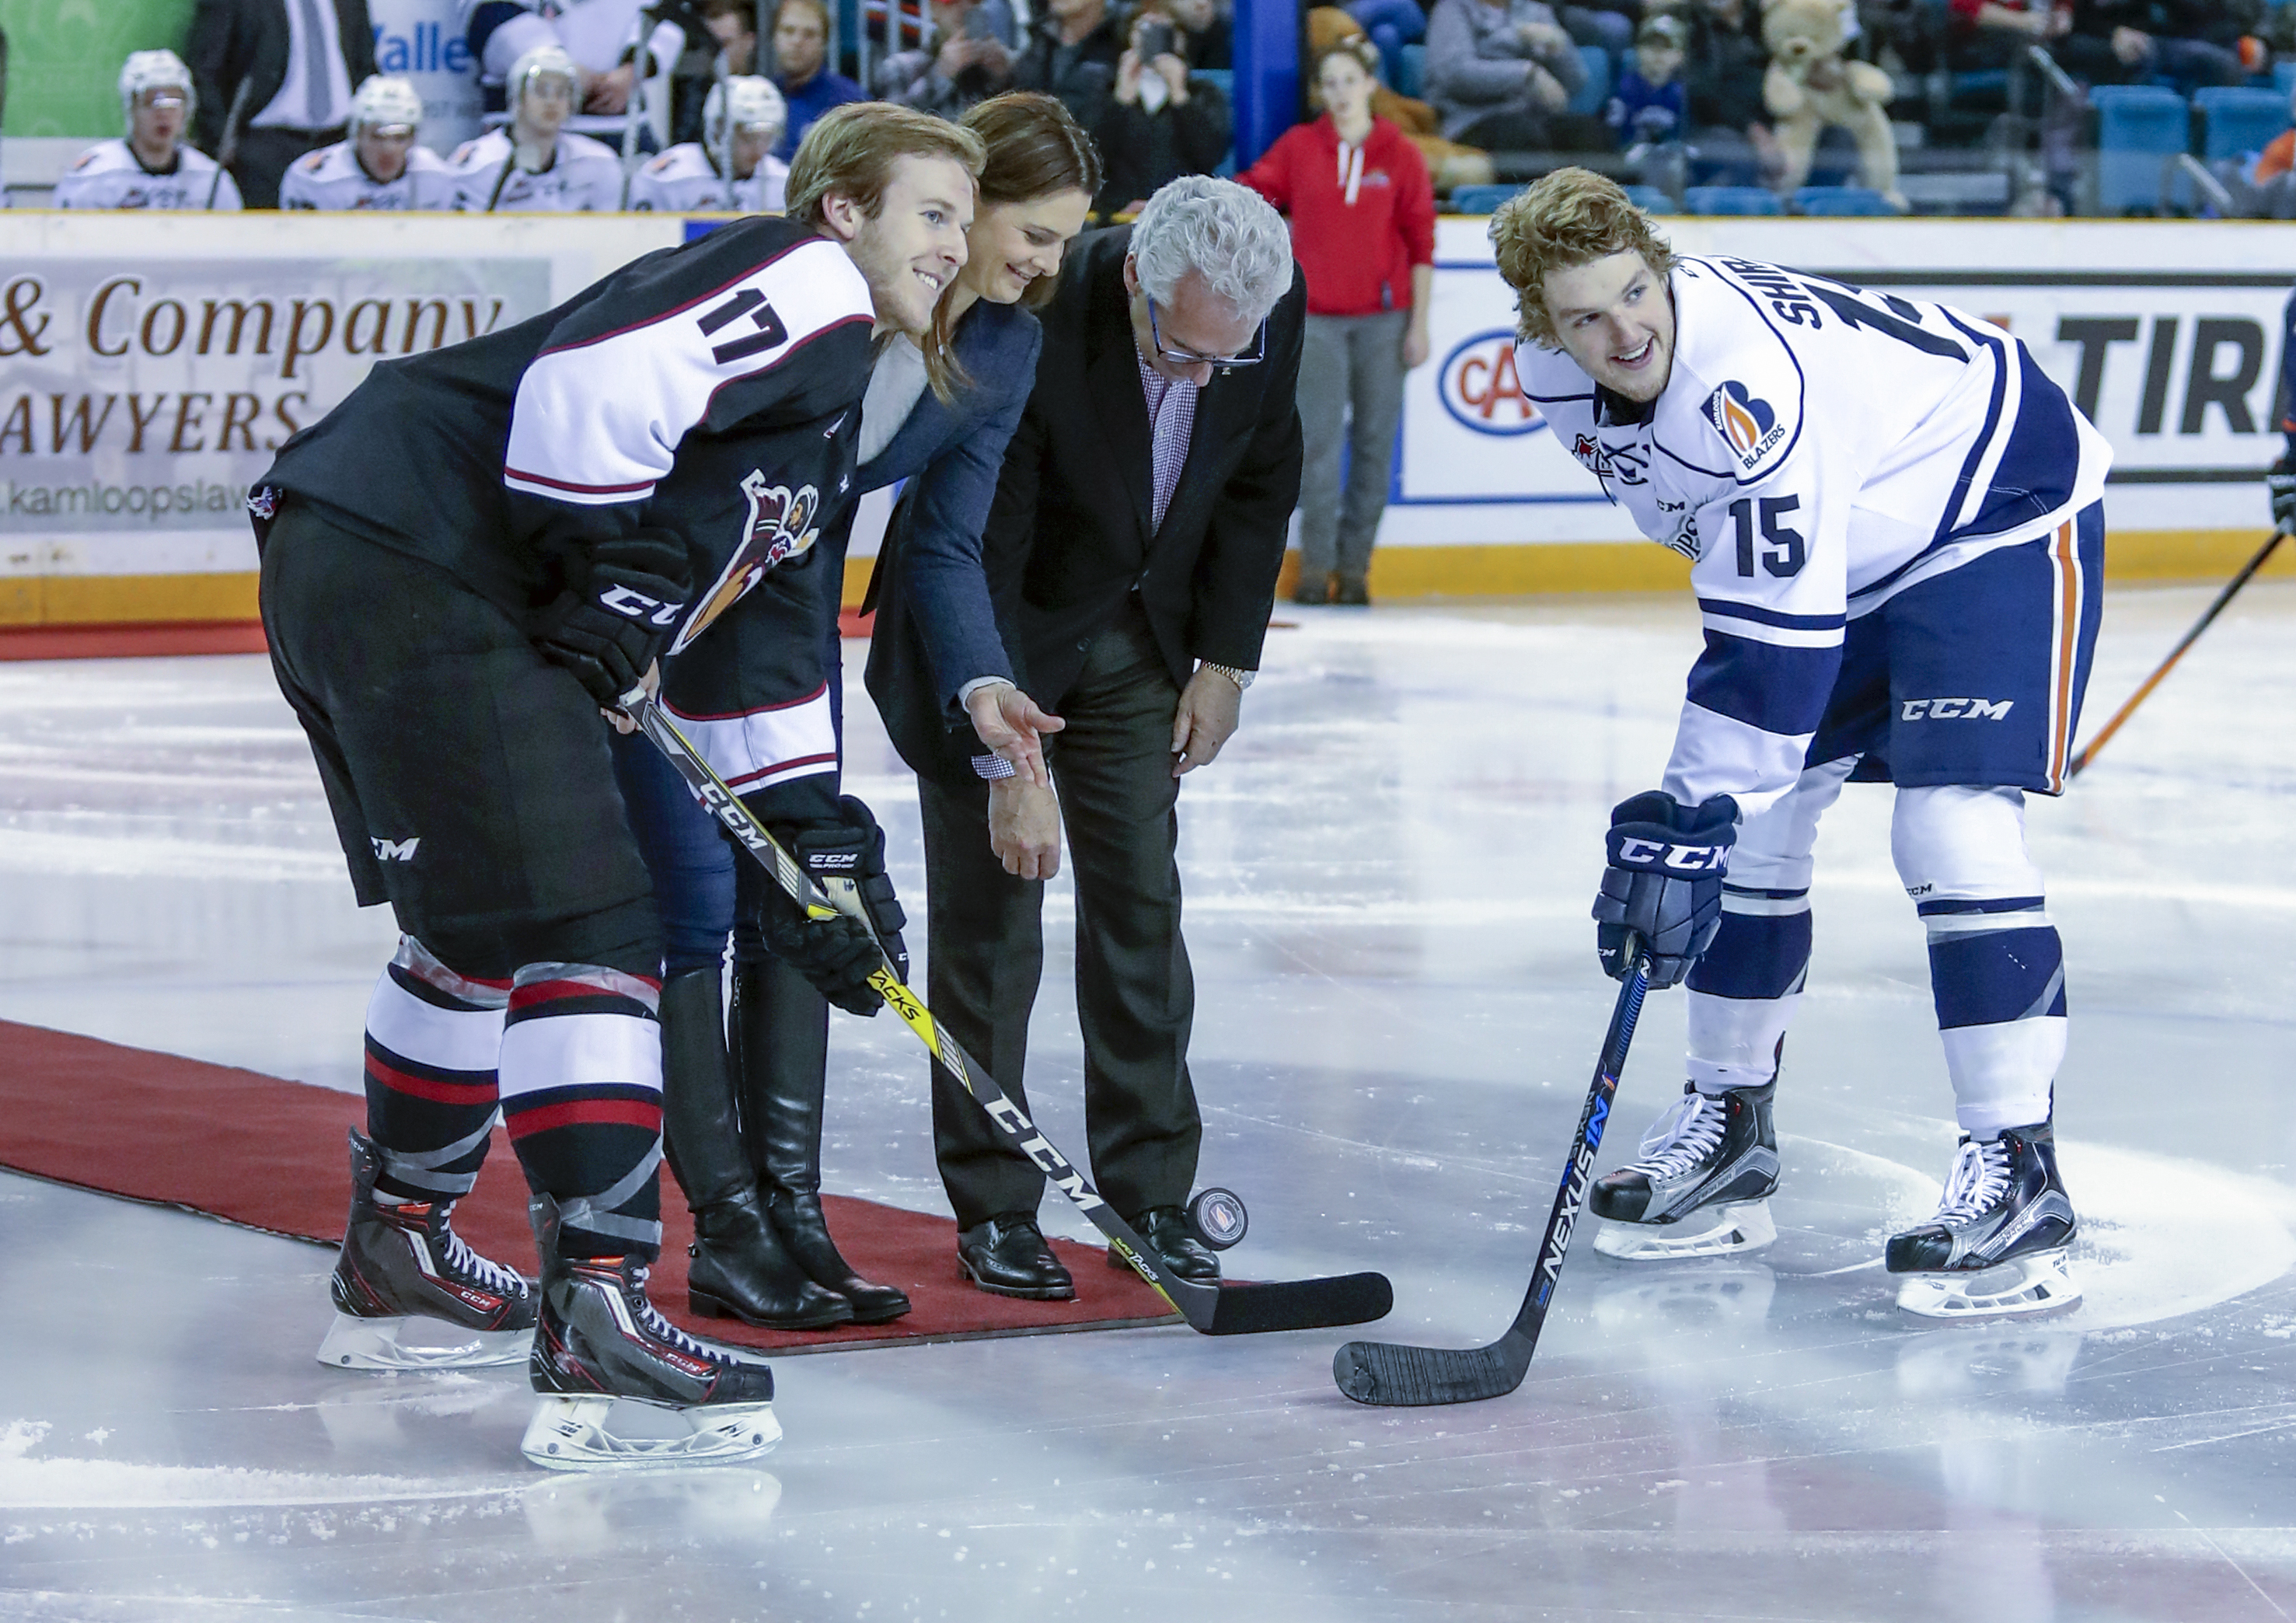 Jennifer Botterill and Tom Renney perform the ceremonial puck drop before the WHL game between the Vancouver Giants and Kamloops Blazers on Saturday December 3, 2016 (photo: Allen Douglas)